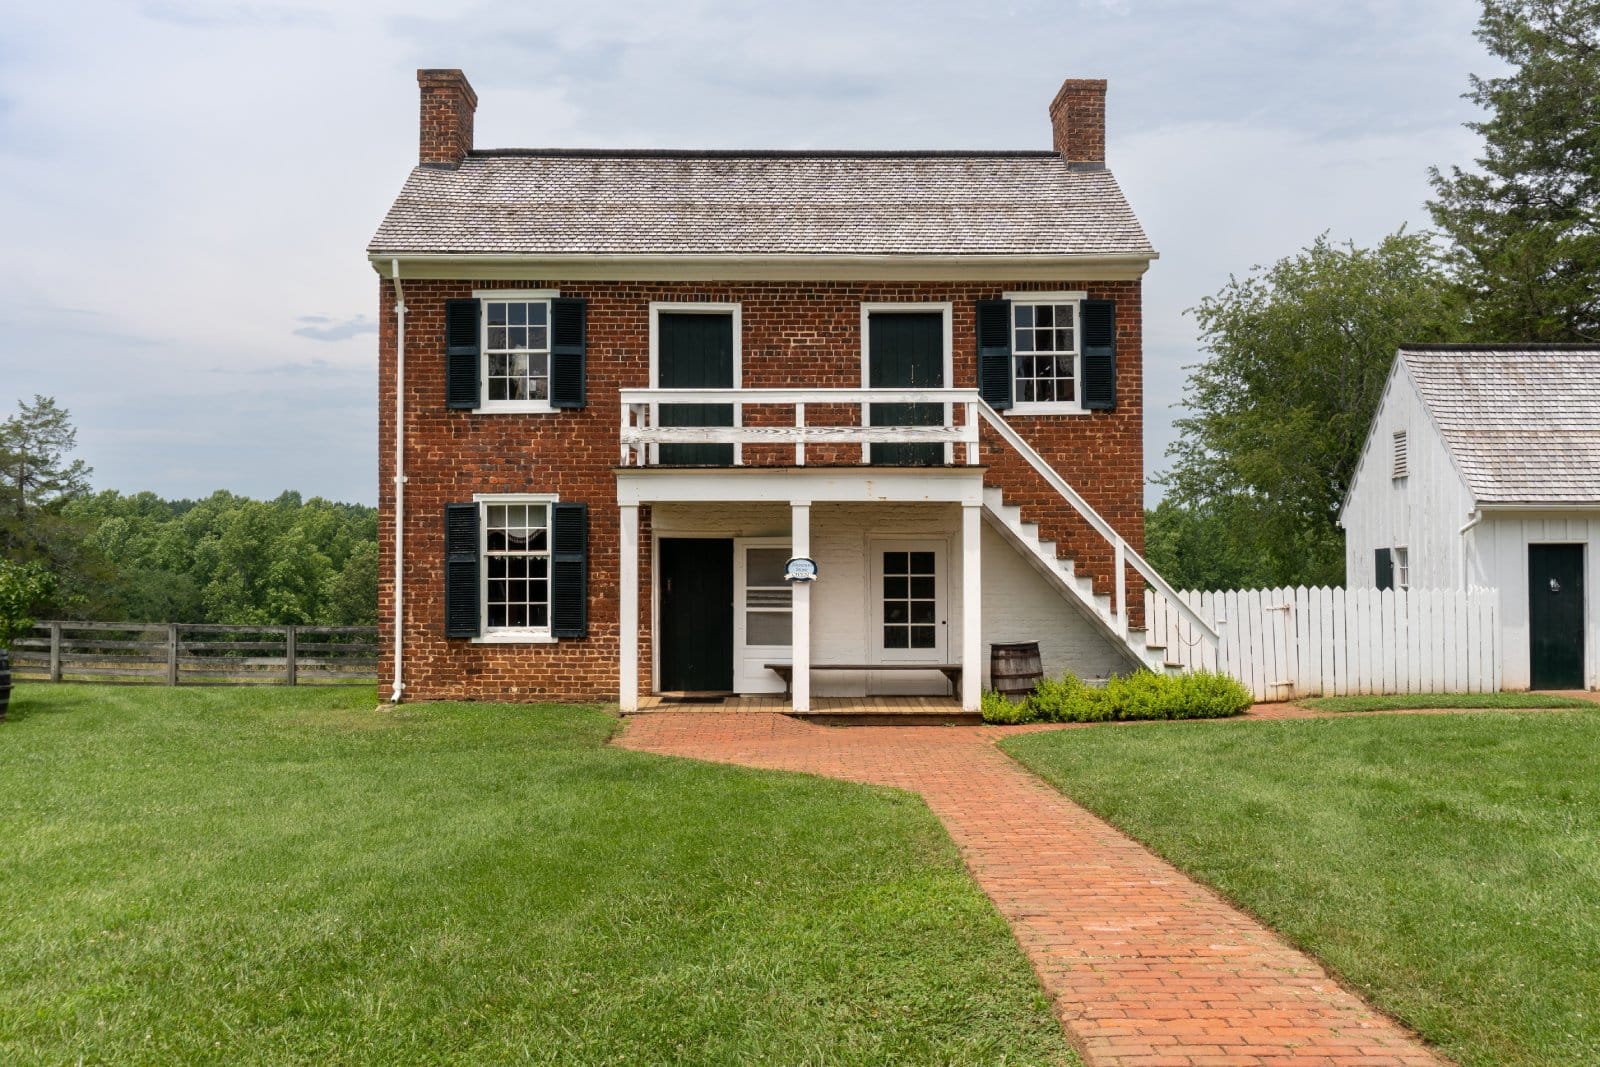 <p class="wp-caption-text">Image Credit: Shutterstock / EWY Media</p>  <p>Explore where General Lee surrendered to General Grant in 1865, effectively ending the Civil War and beginning the process of national reconciliation.</p>